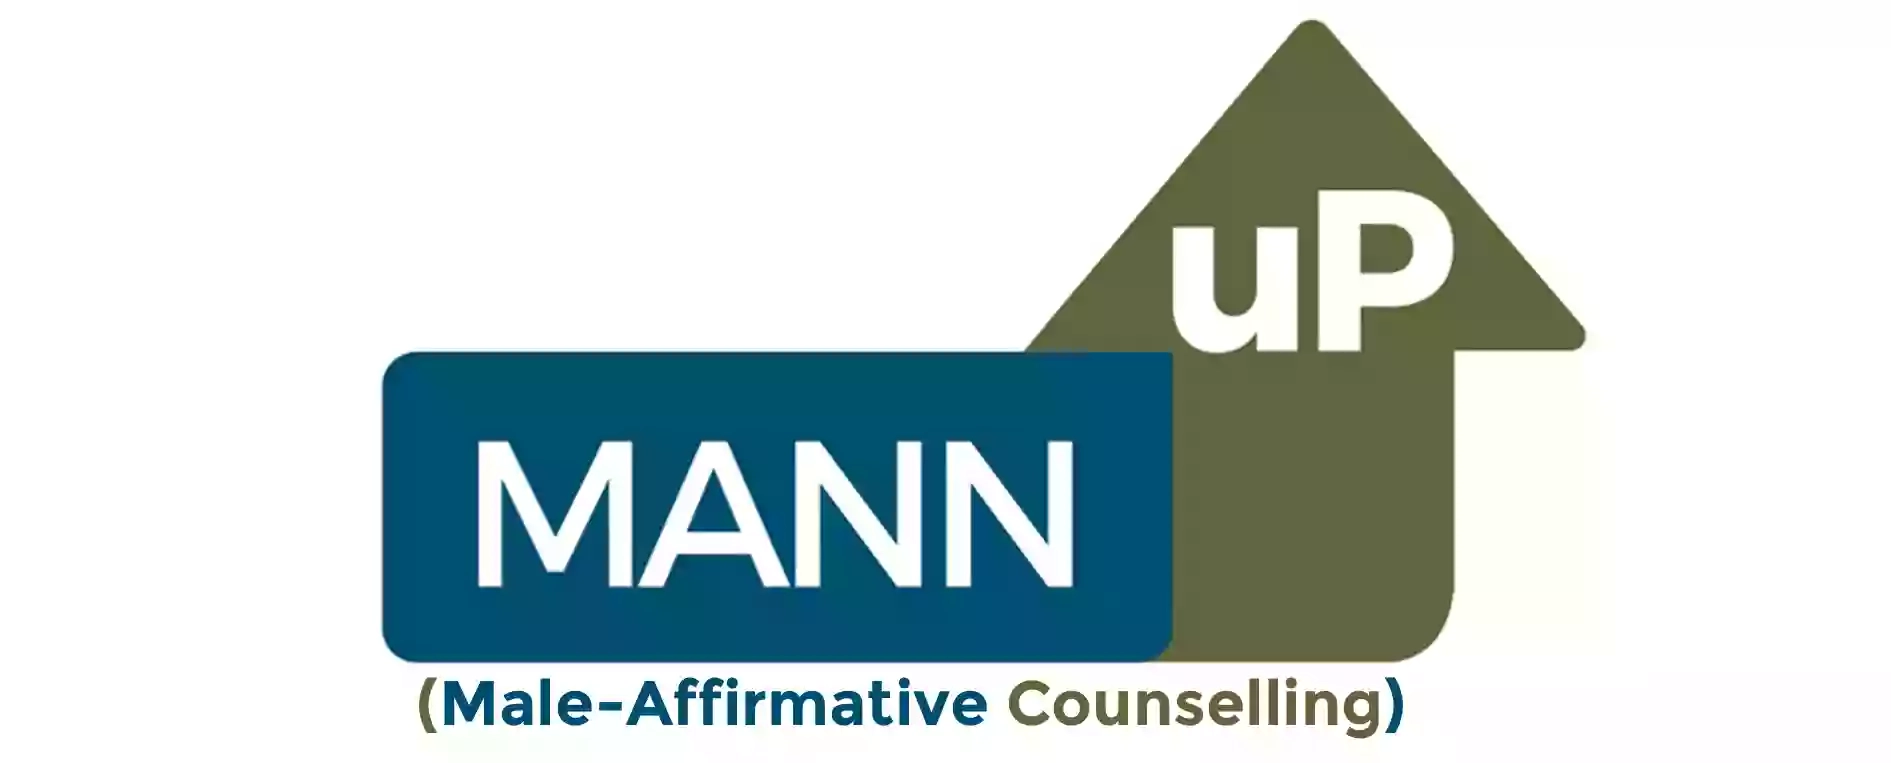 MANN uP (Male-Affirmative Counselling)